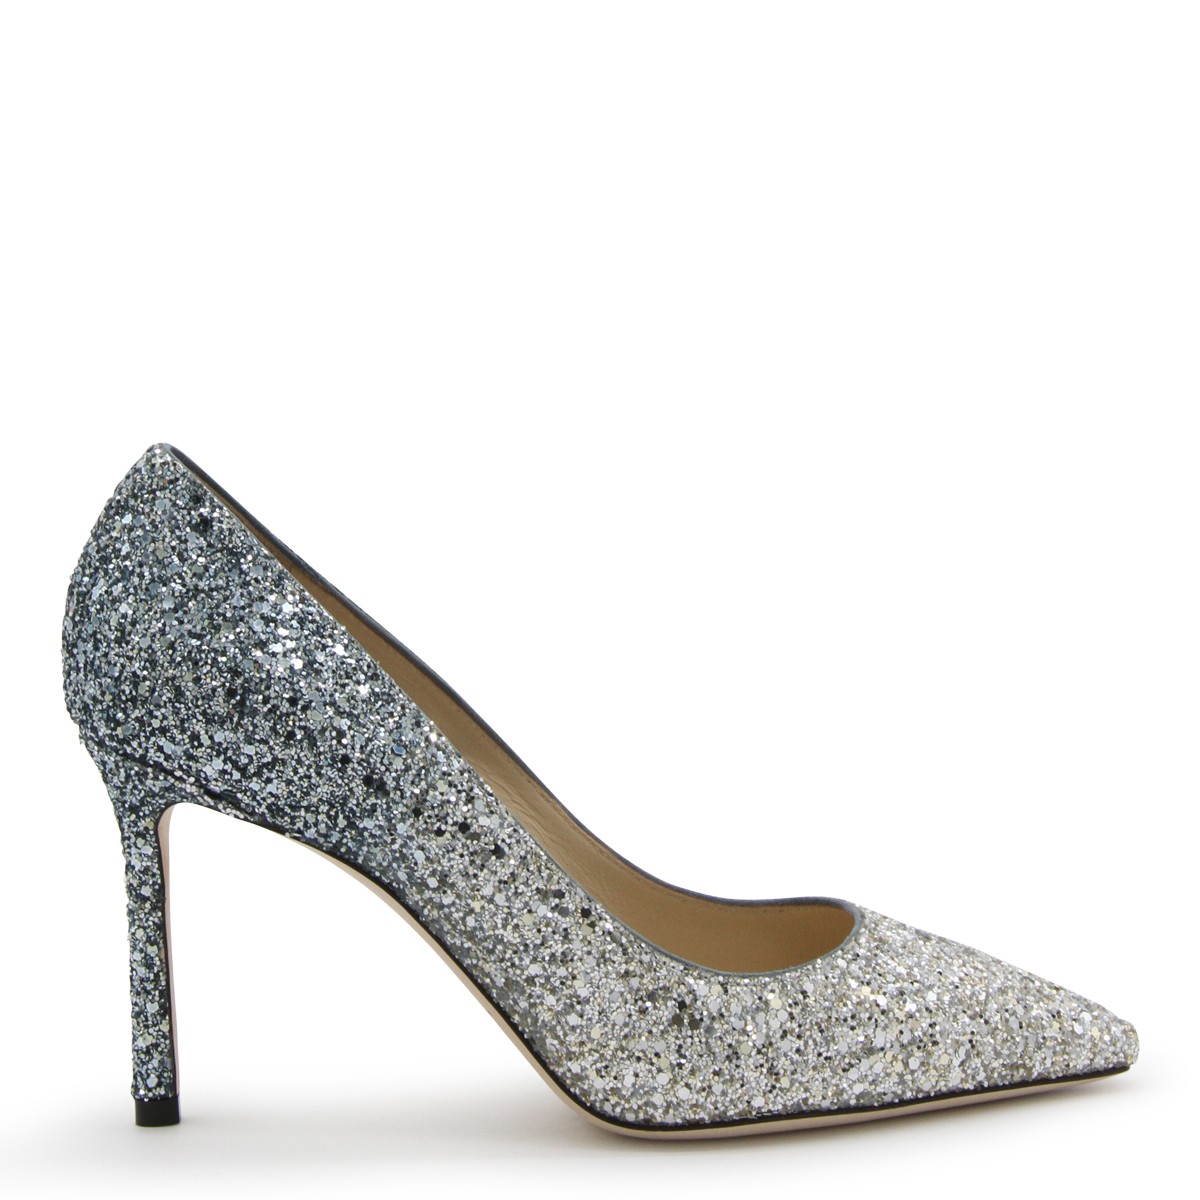 DUSK BLUE AND SILVER-TONE LEATHER ROMY PUMPS